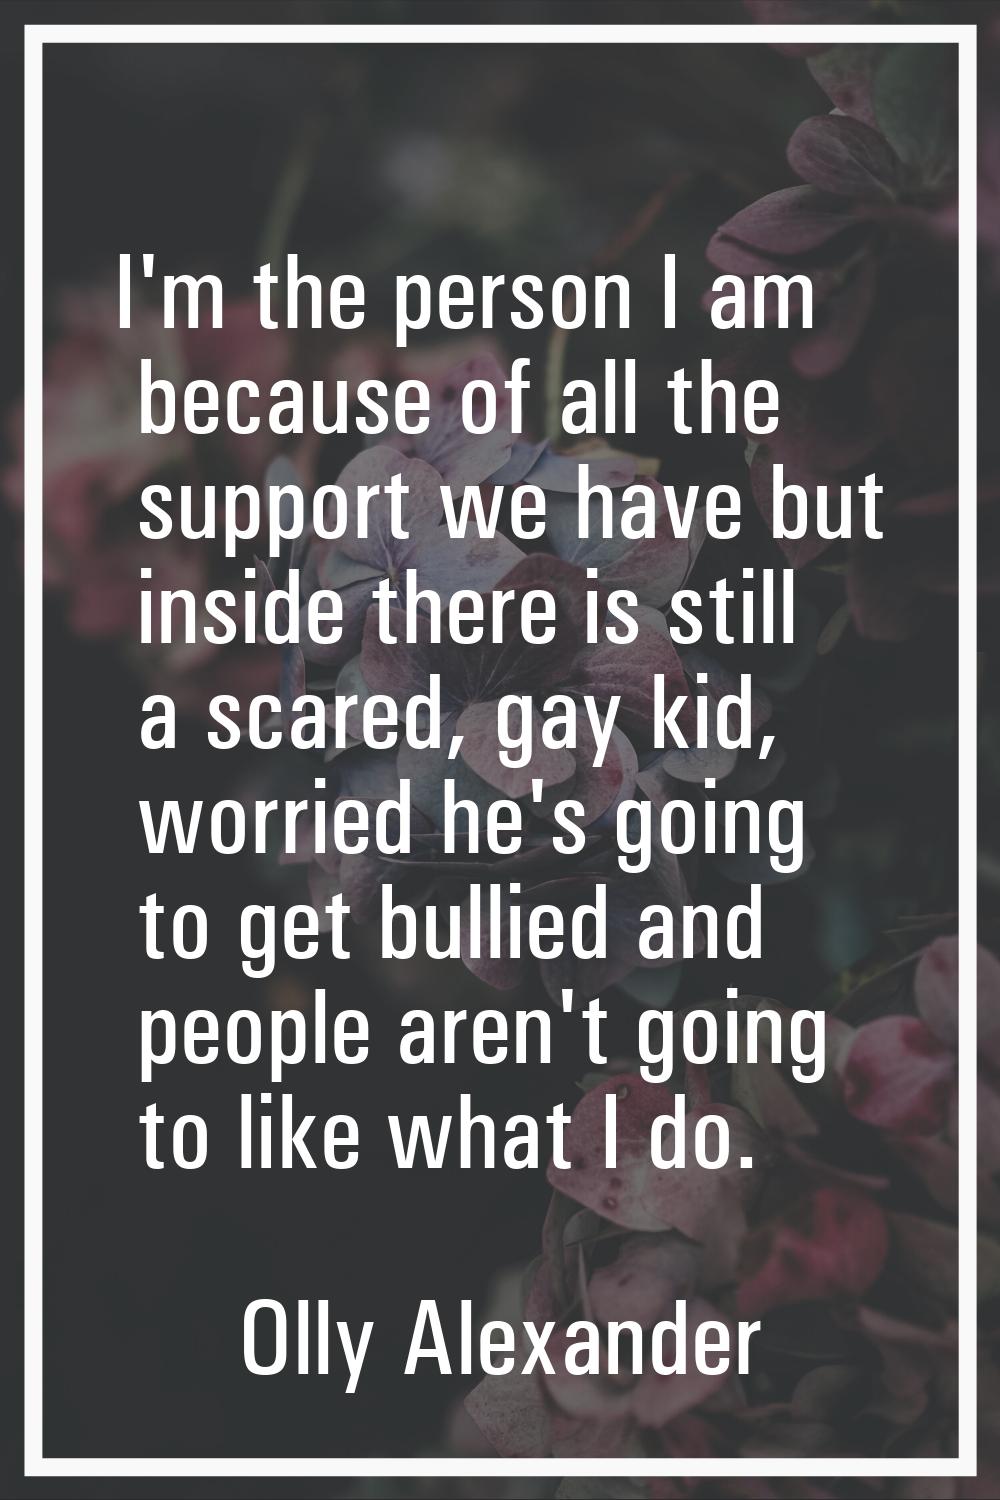 I'm the person I am because of all the support we have but inside there is still a scared, gay kid,